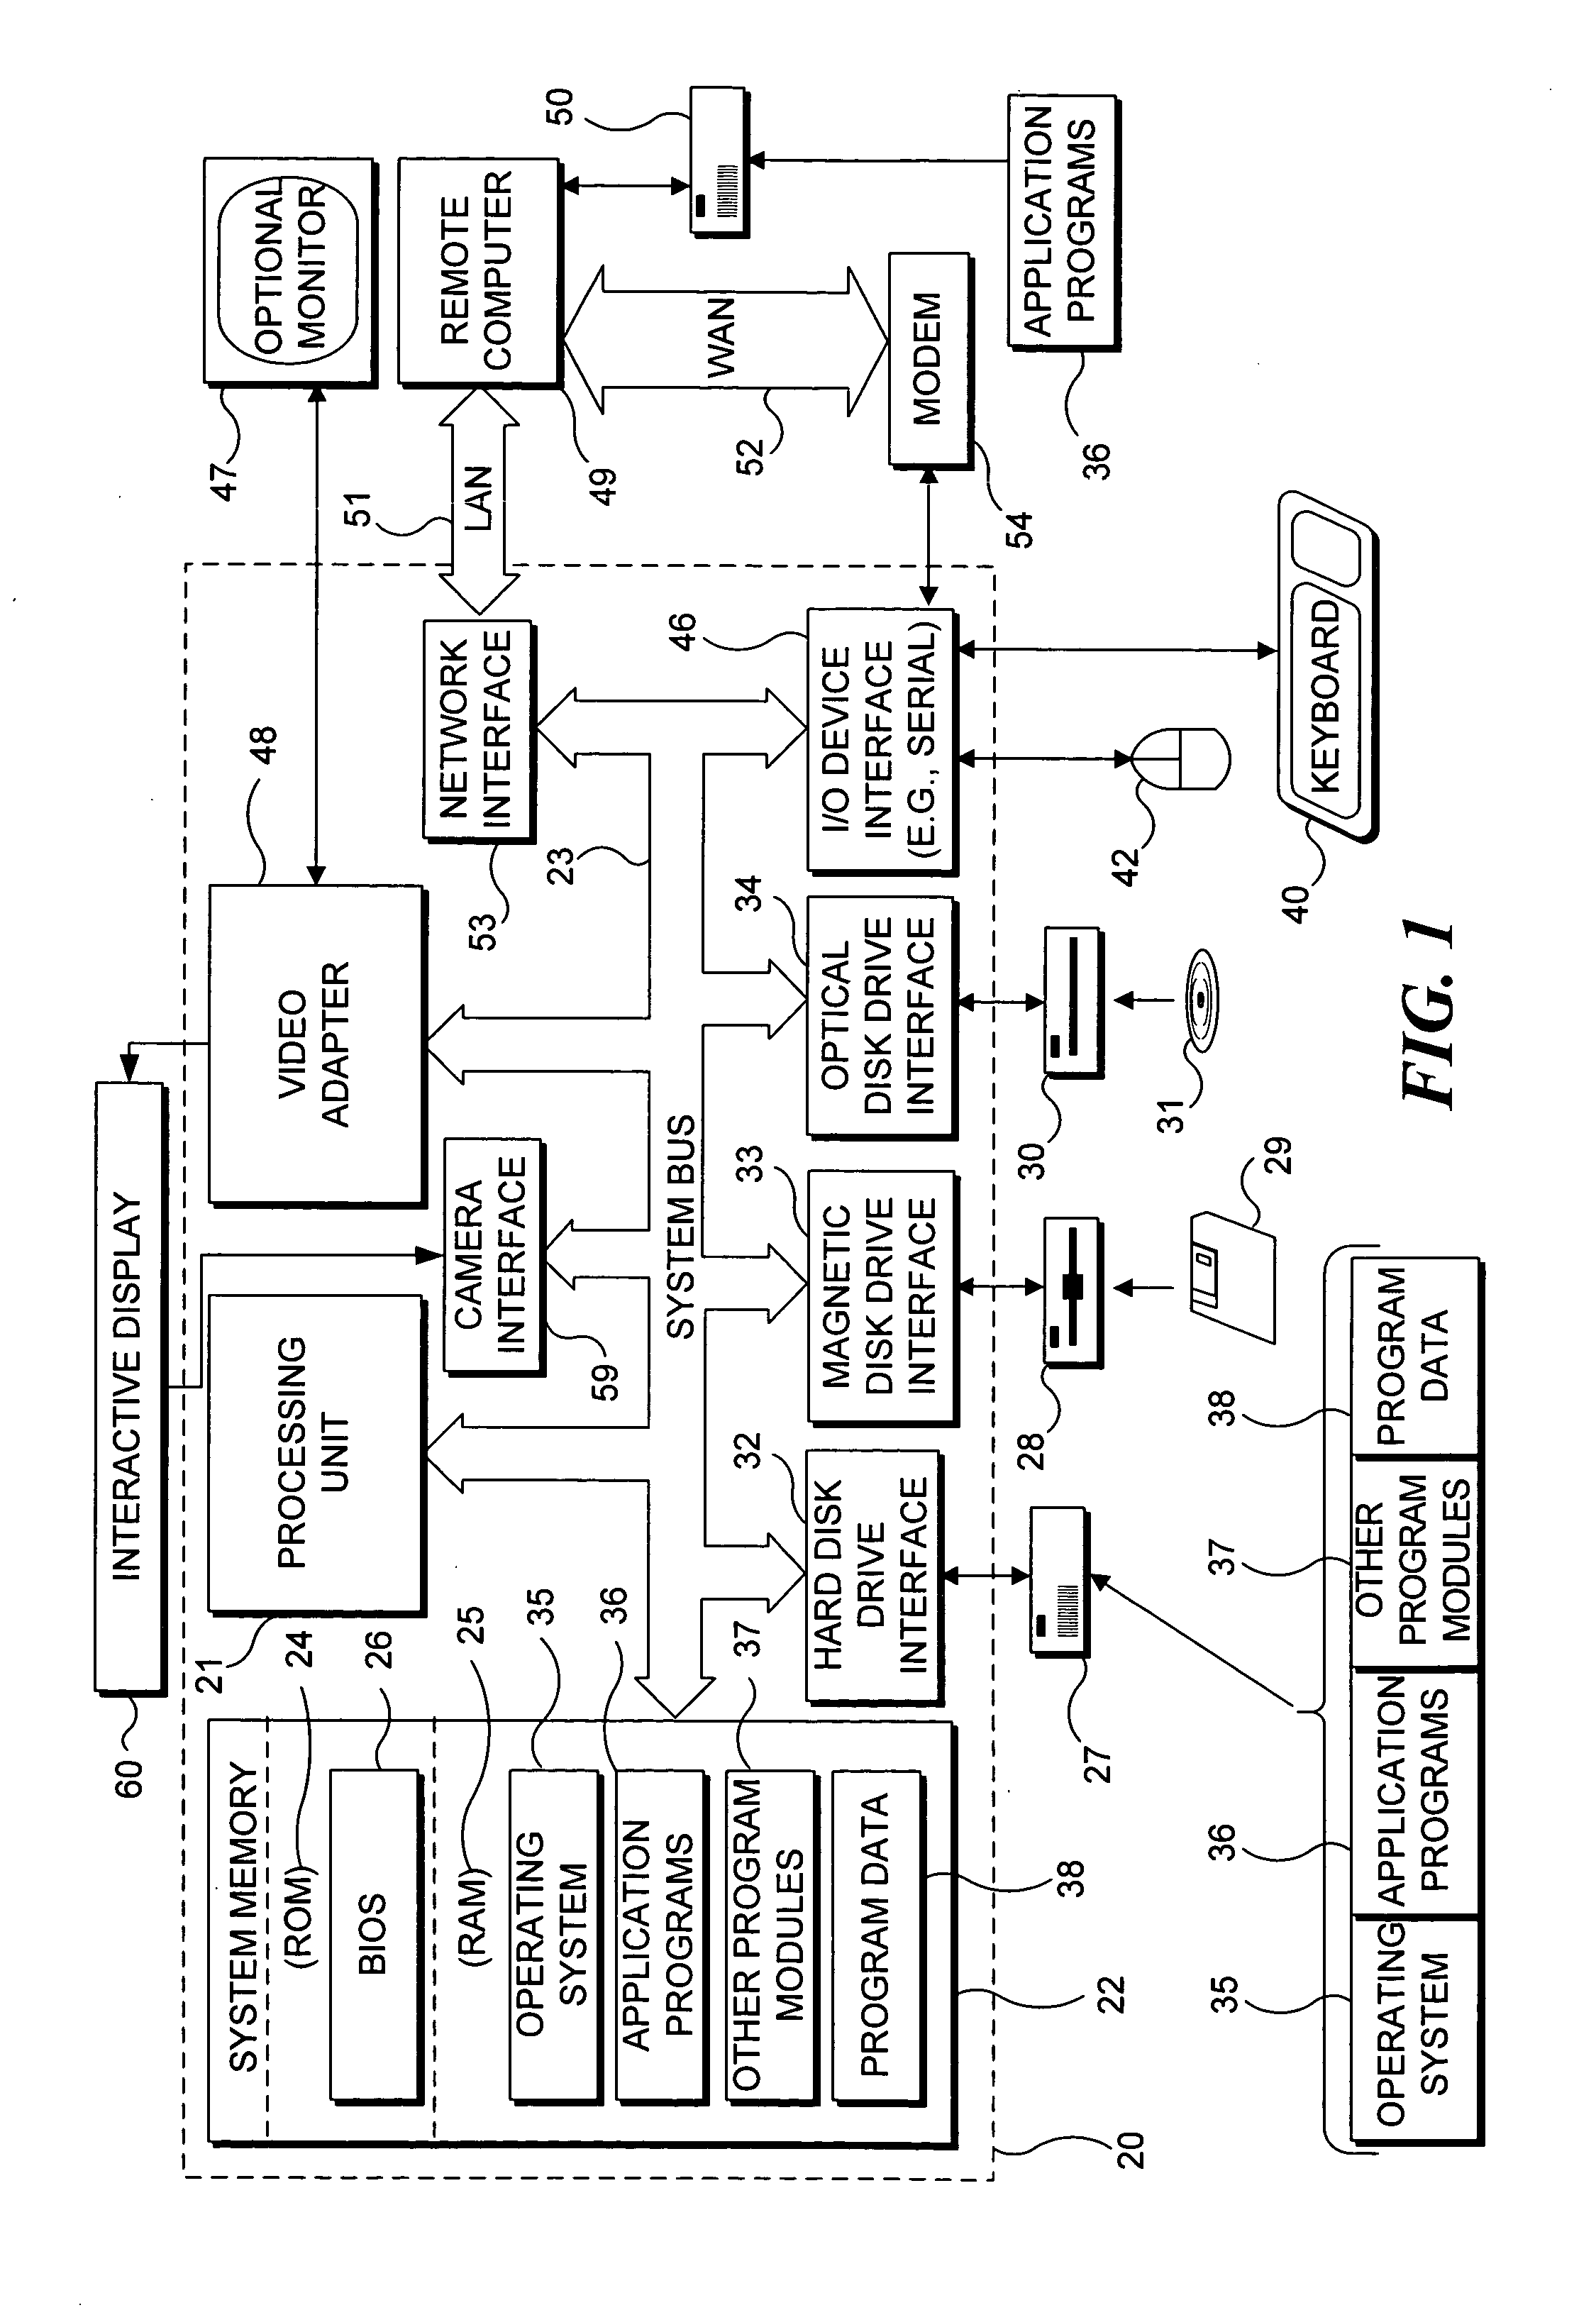 Method and system for reducing effects of undesired signals in an infrared imaging system